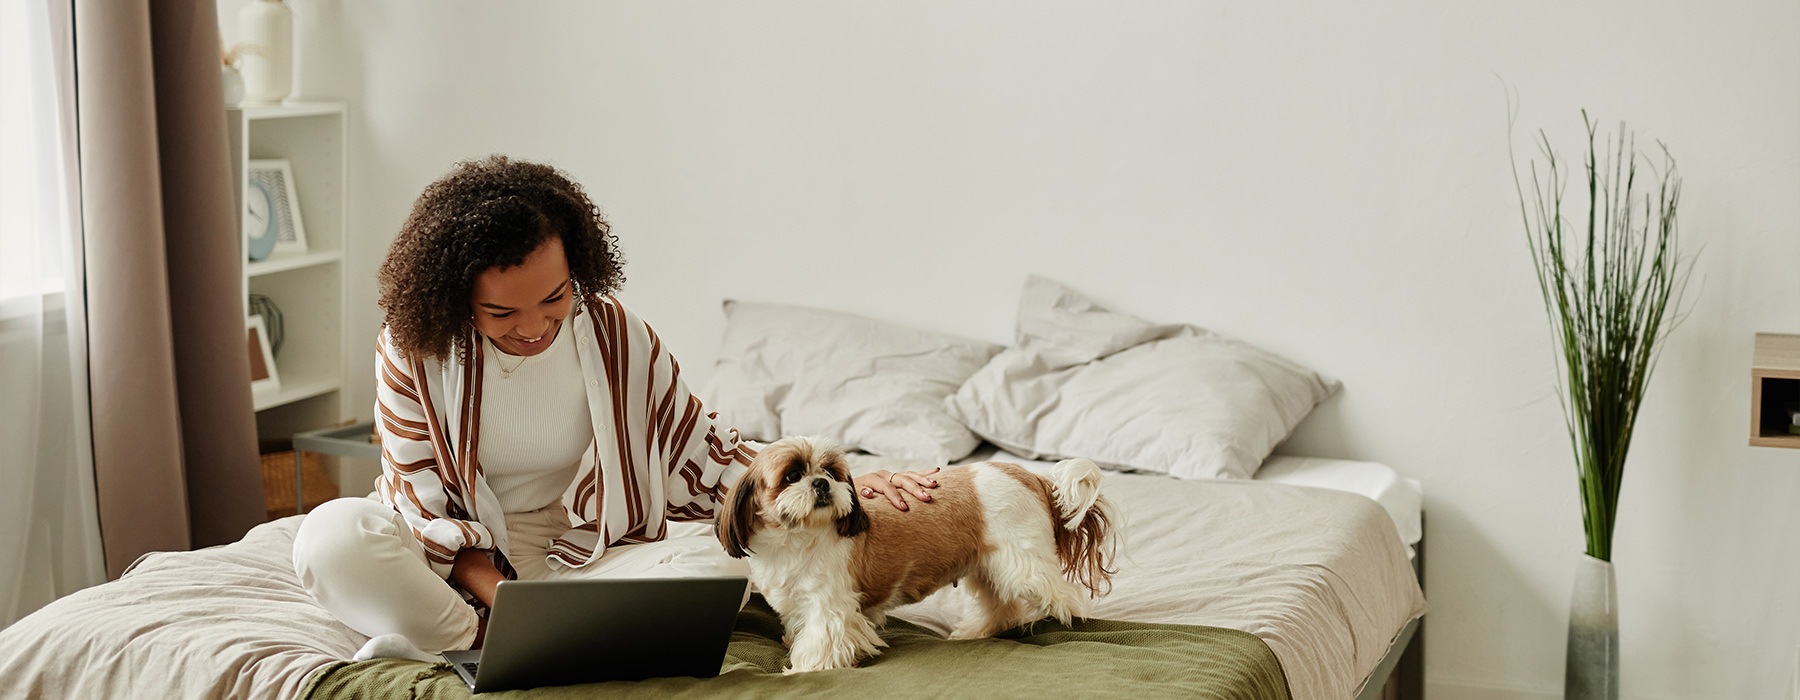 A woman multitasking, petting her dog while working on her laptop while seated on her bed.